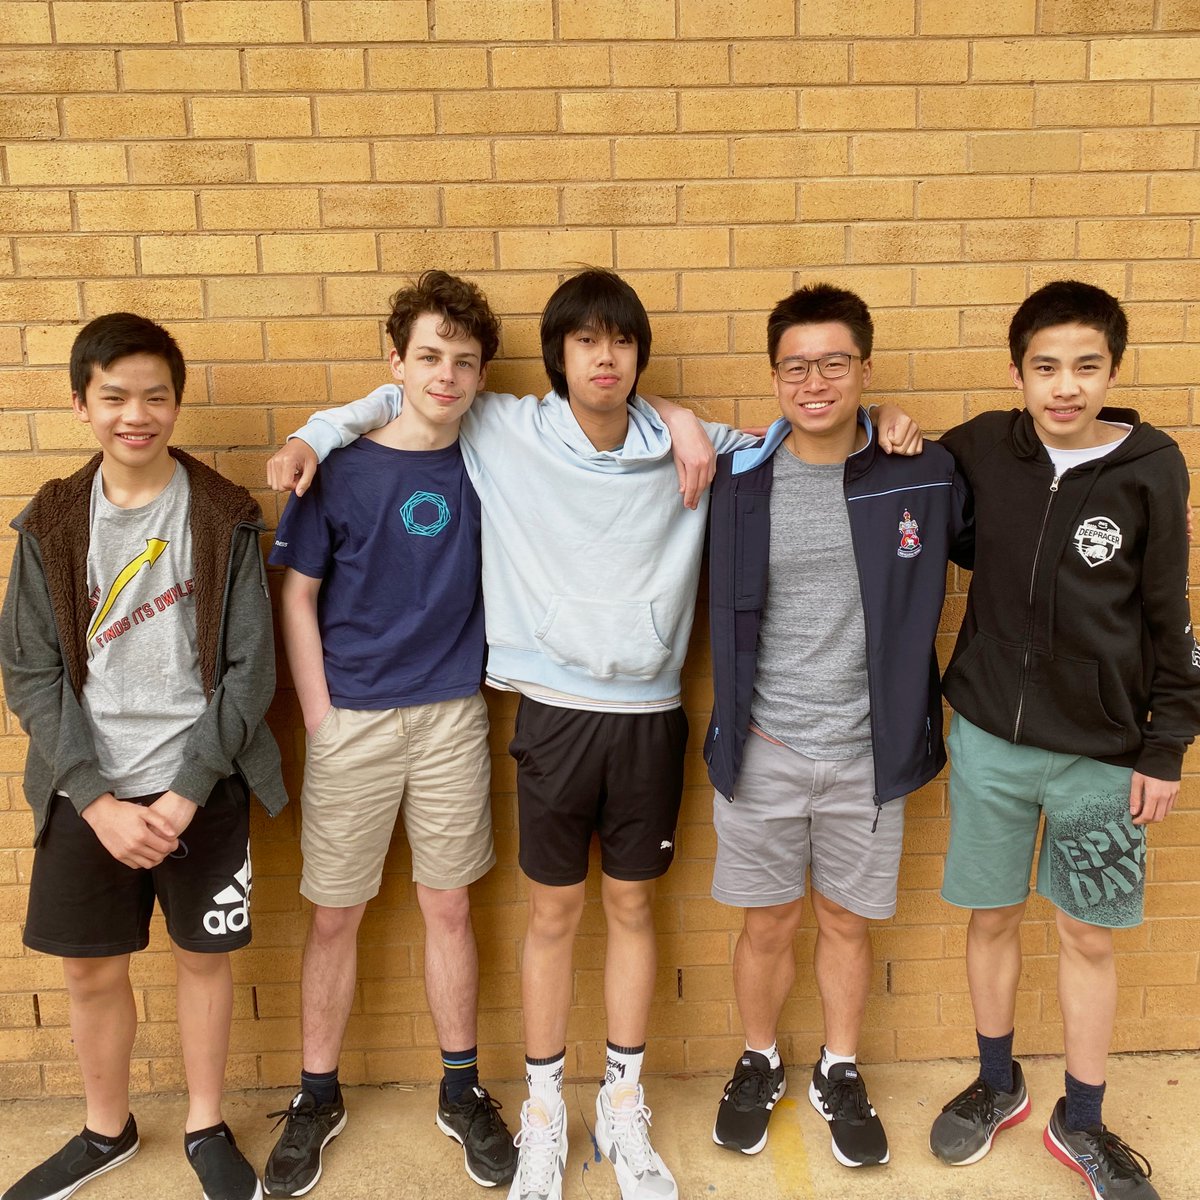 Congratulations to Joshua, Lachlan, Thomas, Oscar, Joshua and Cameron for representing Canberra Grammar School and the ACT in the 2021 Australian School Teams #Chess Championship! 

The students displayed some impressive skill amongst some tough competition!